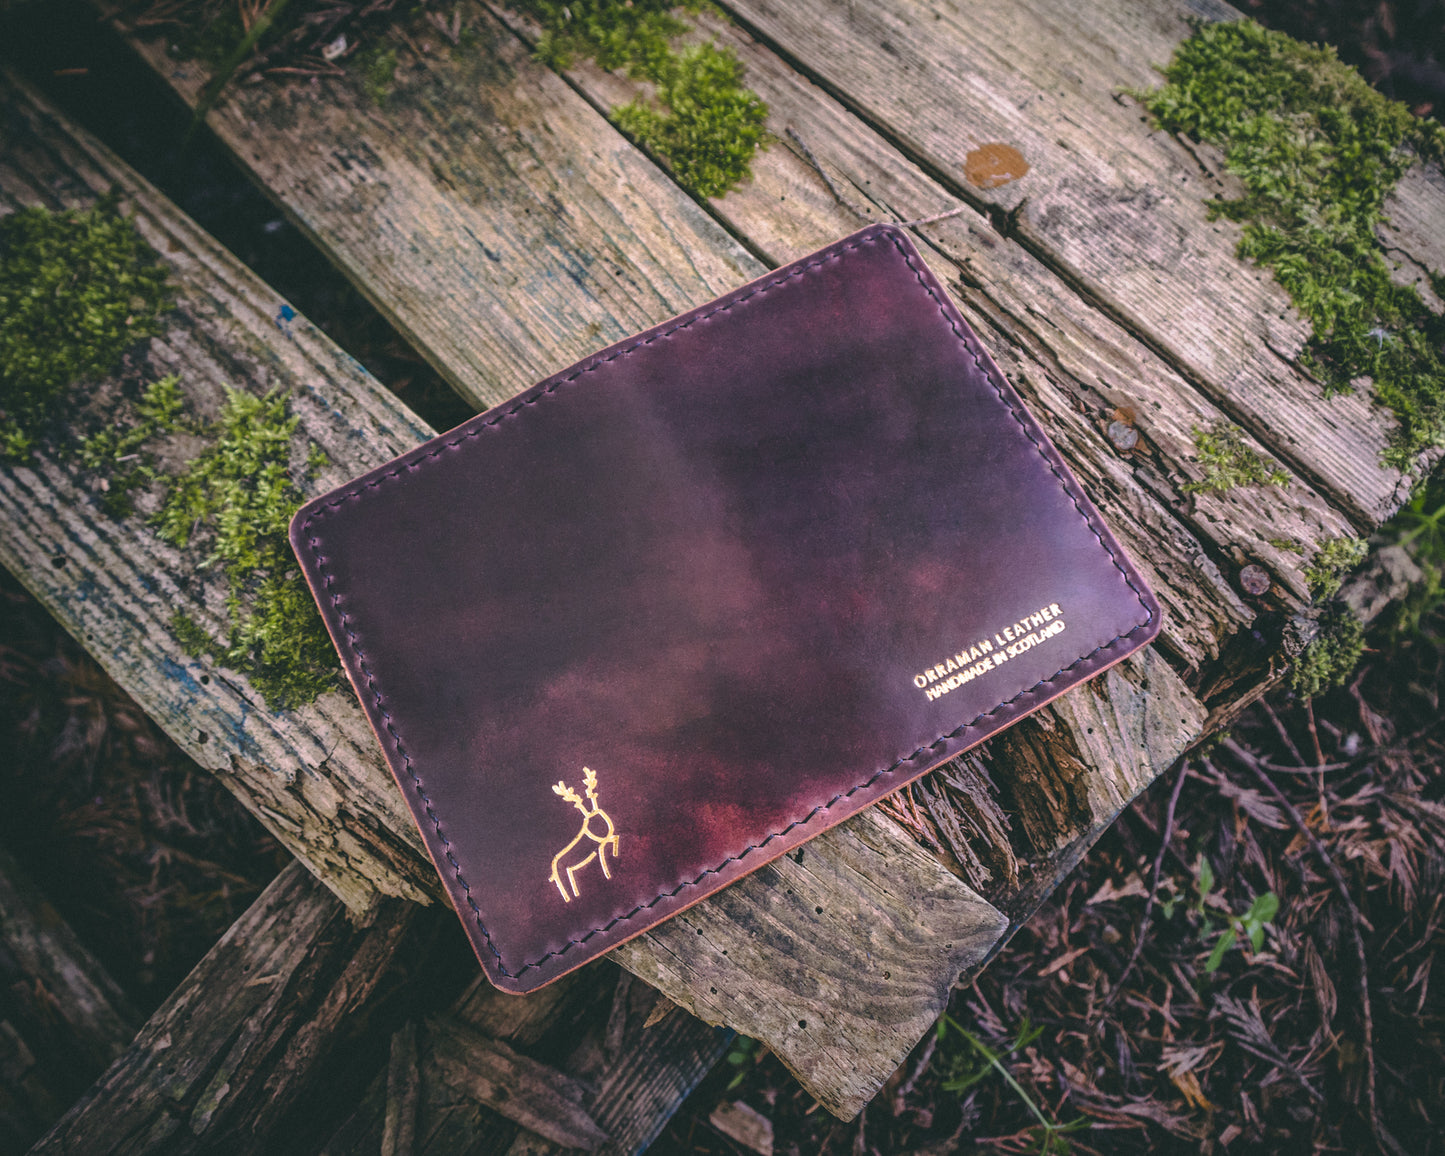 The Cairn Wallet